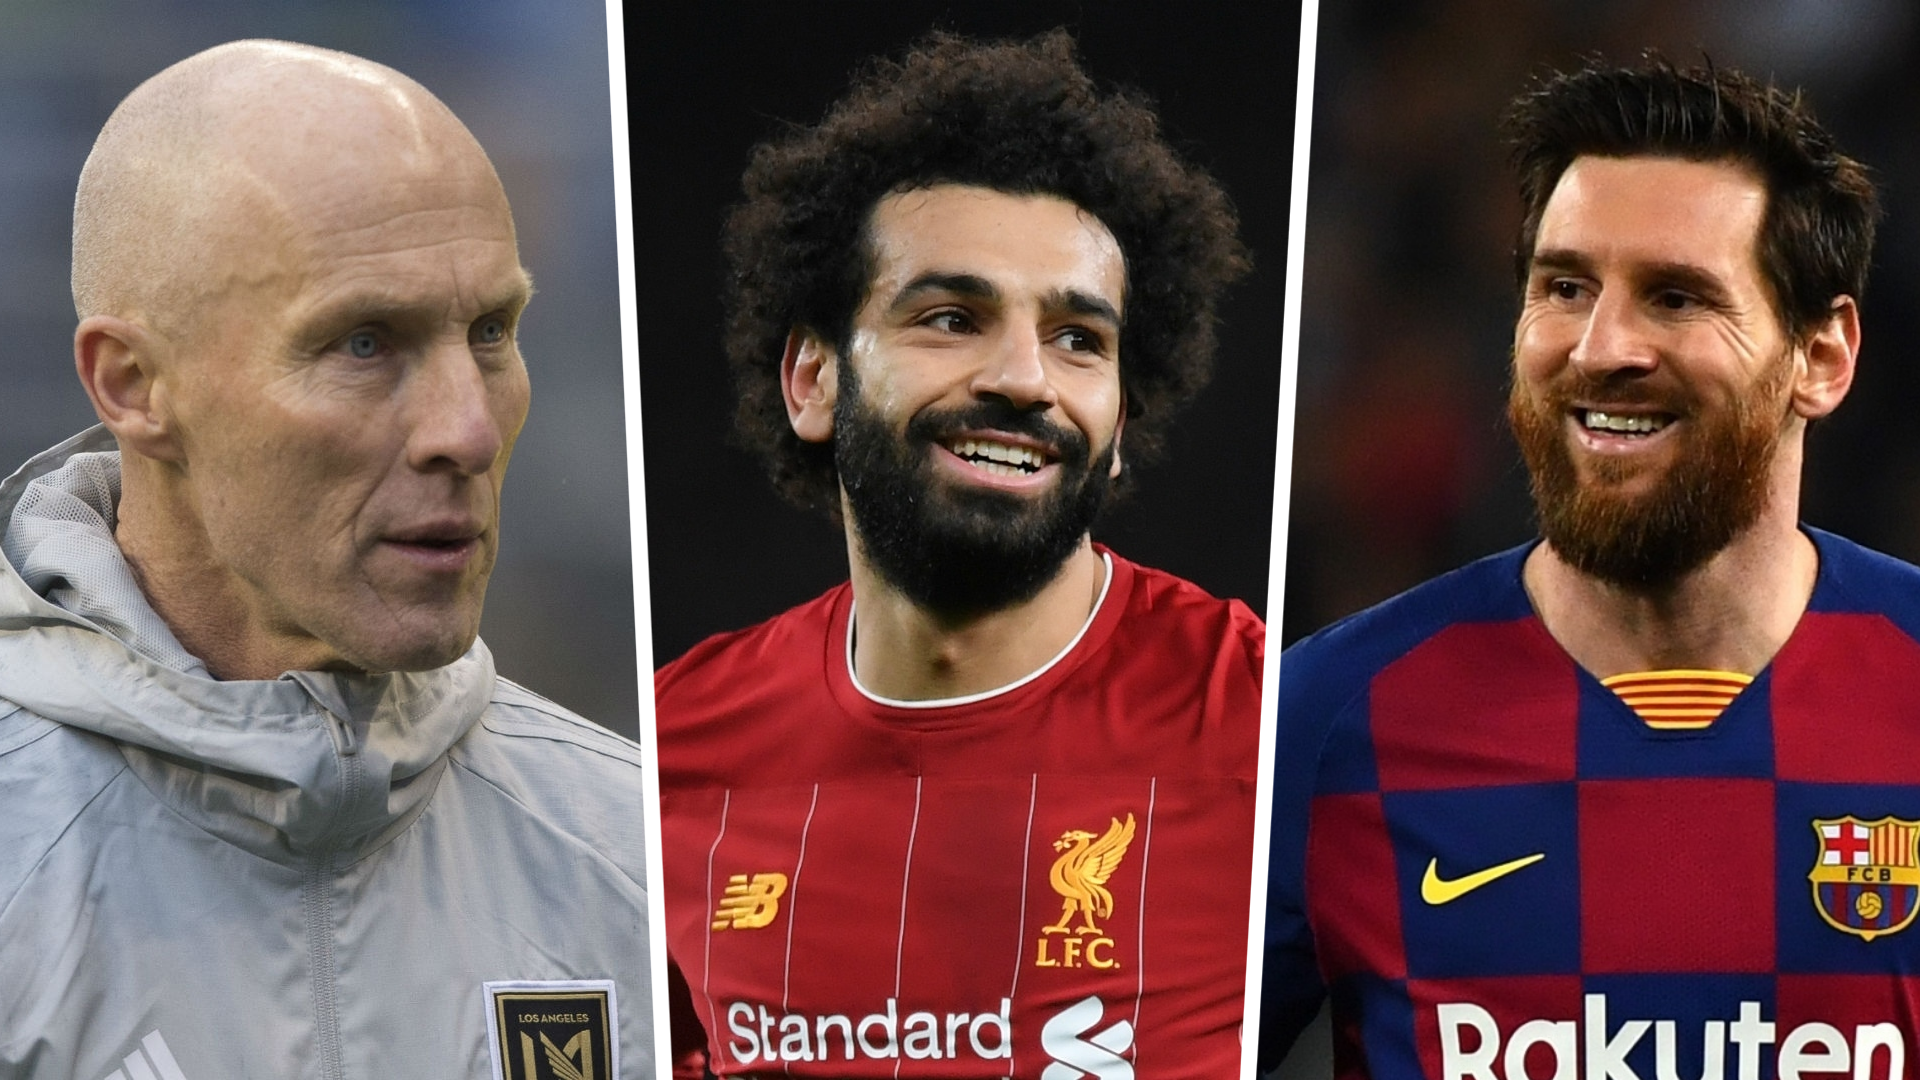 'Watch Messi closely' - Bradley reveals advice that led to Salah becoming 'one of the best players in the world'